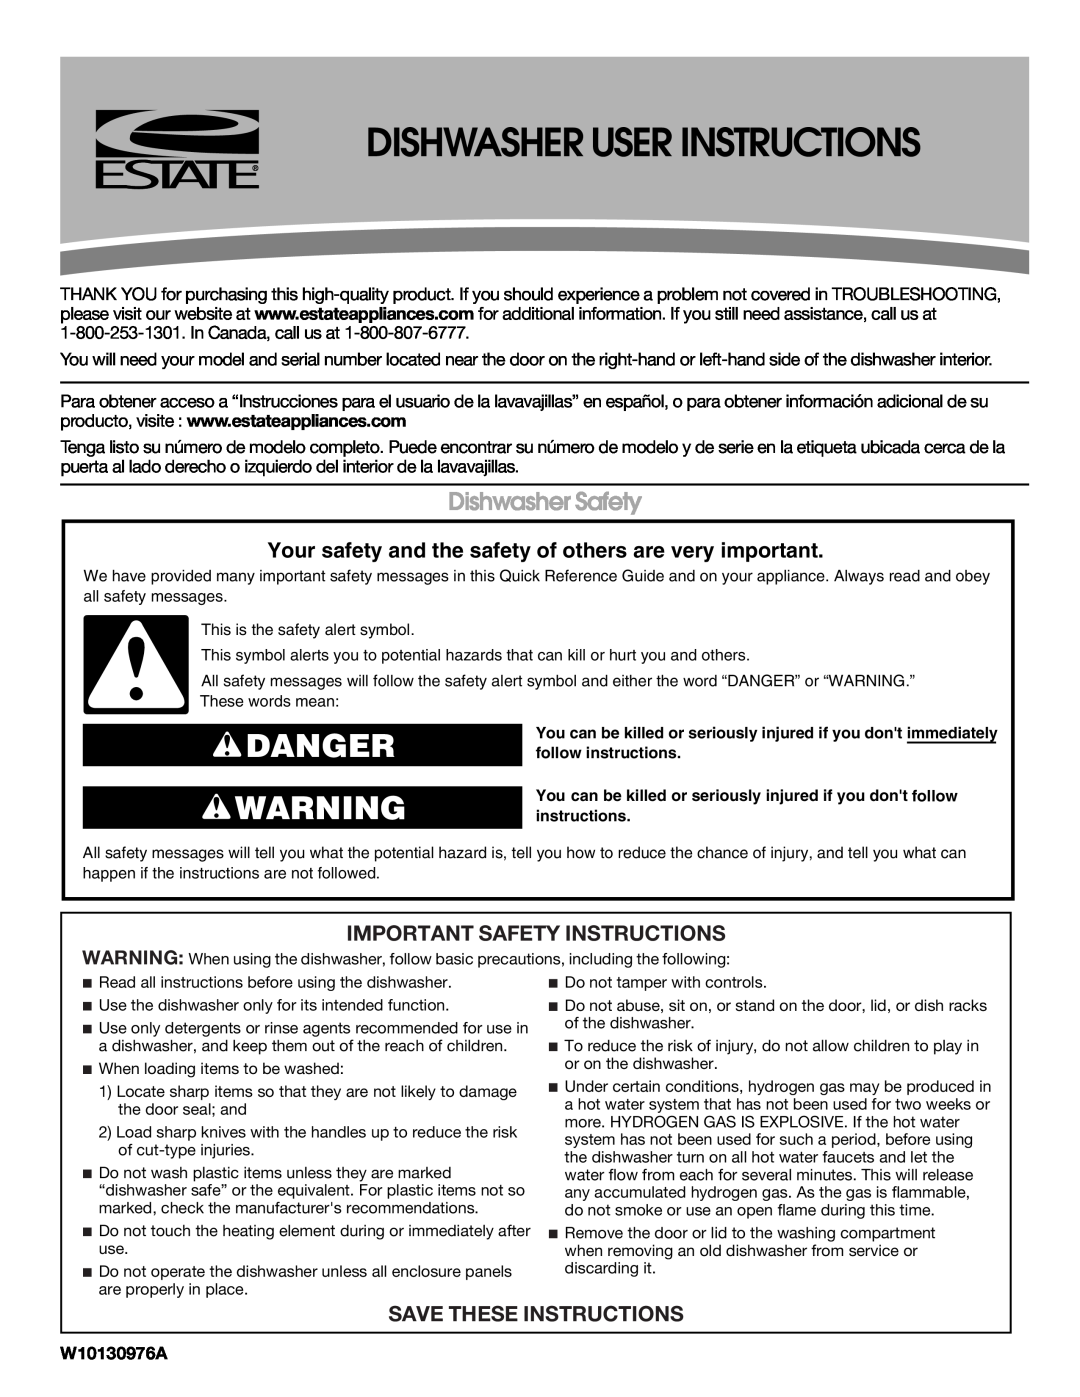 Estate TUD4700SQ important safety instructions Dishwasher User Instructions, Danger, Dishwasher Safety, W10130976A 